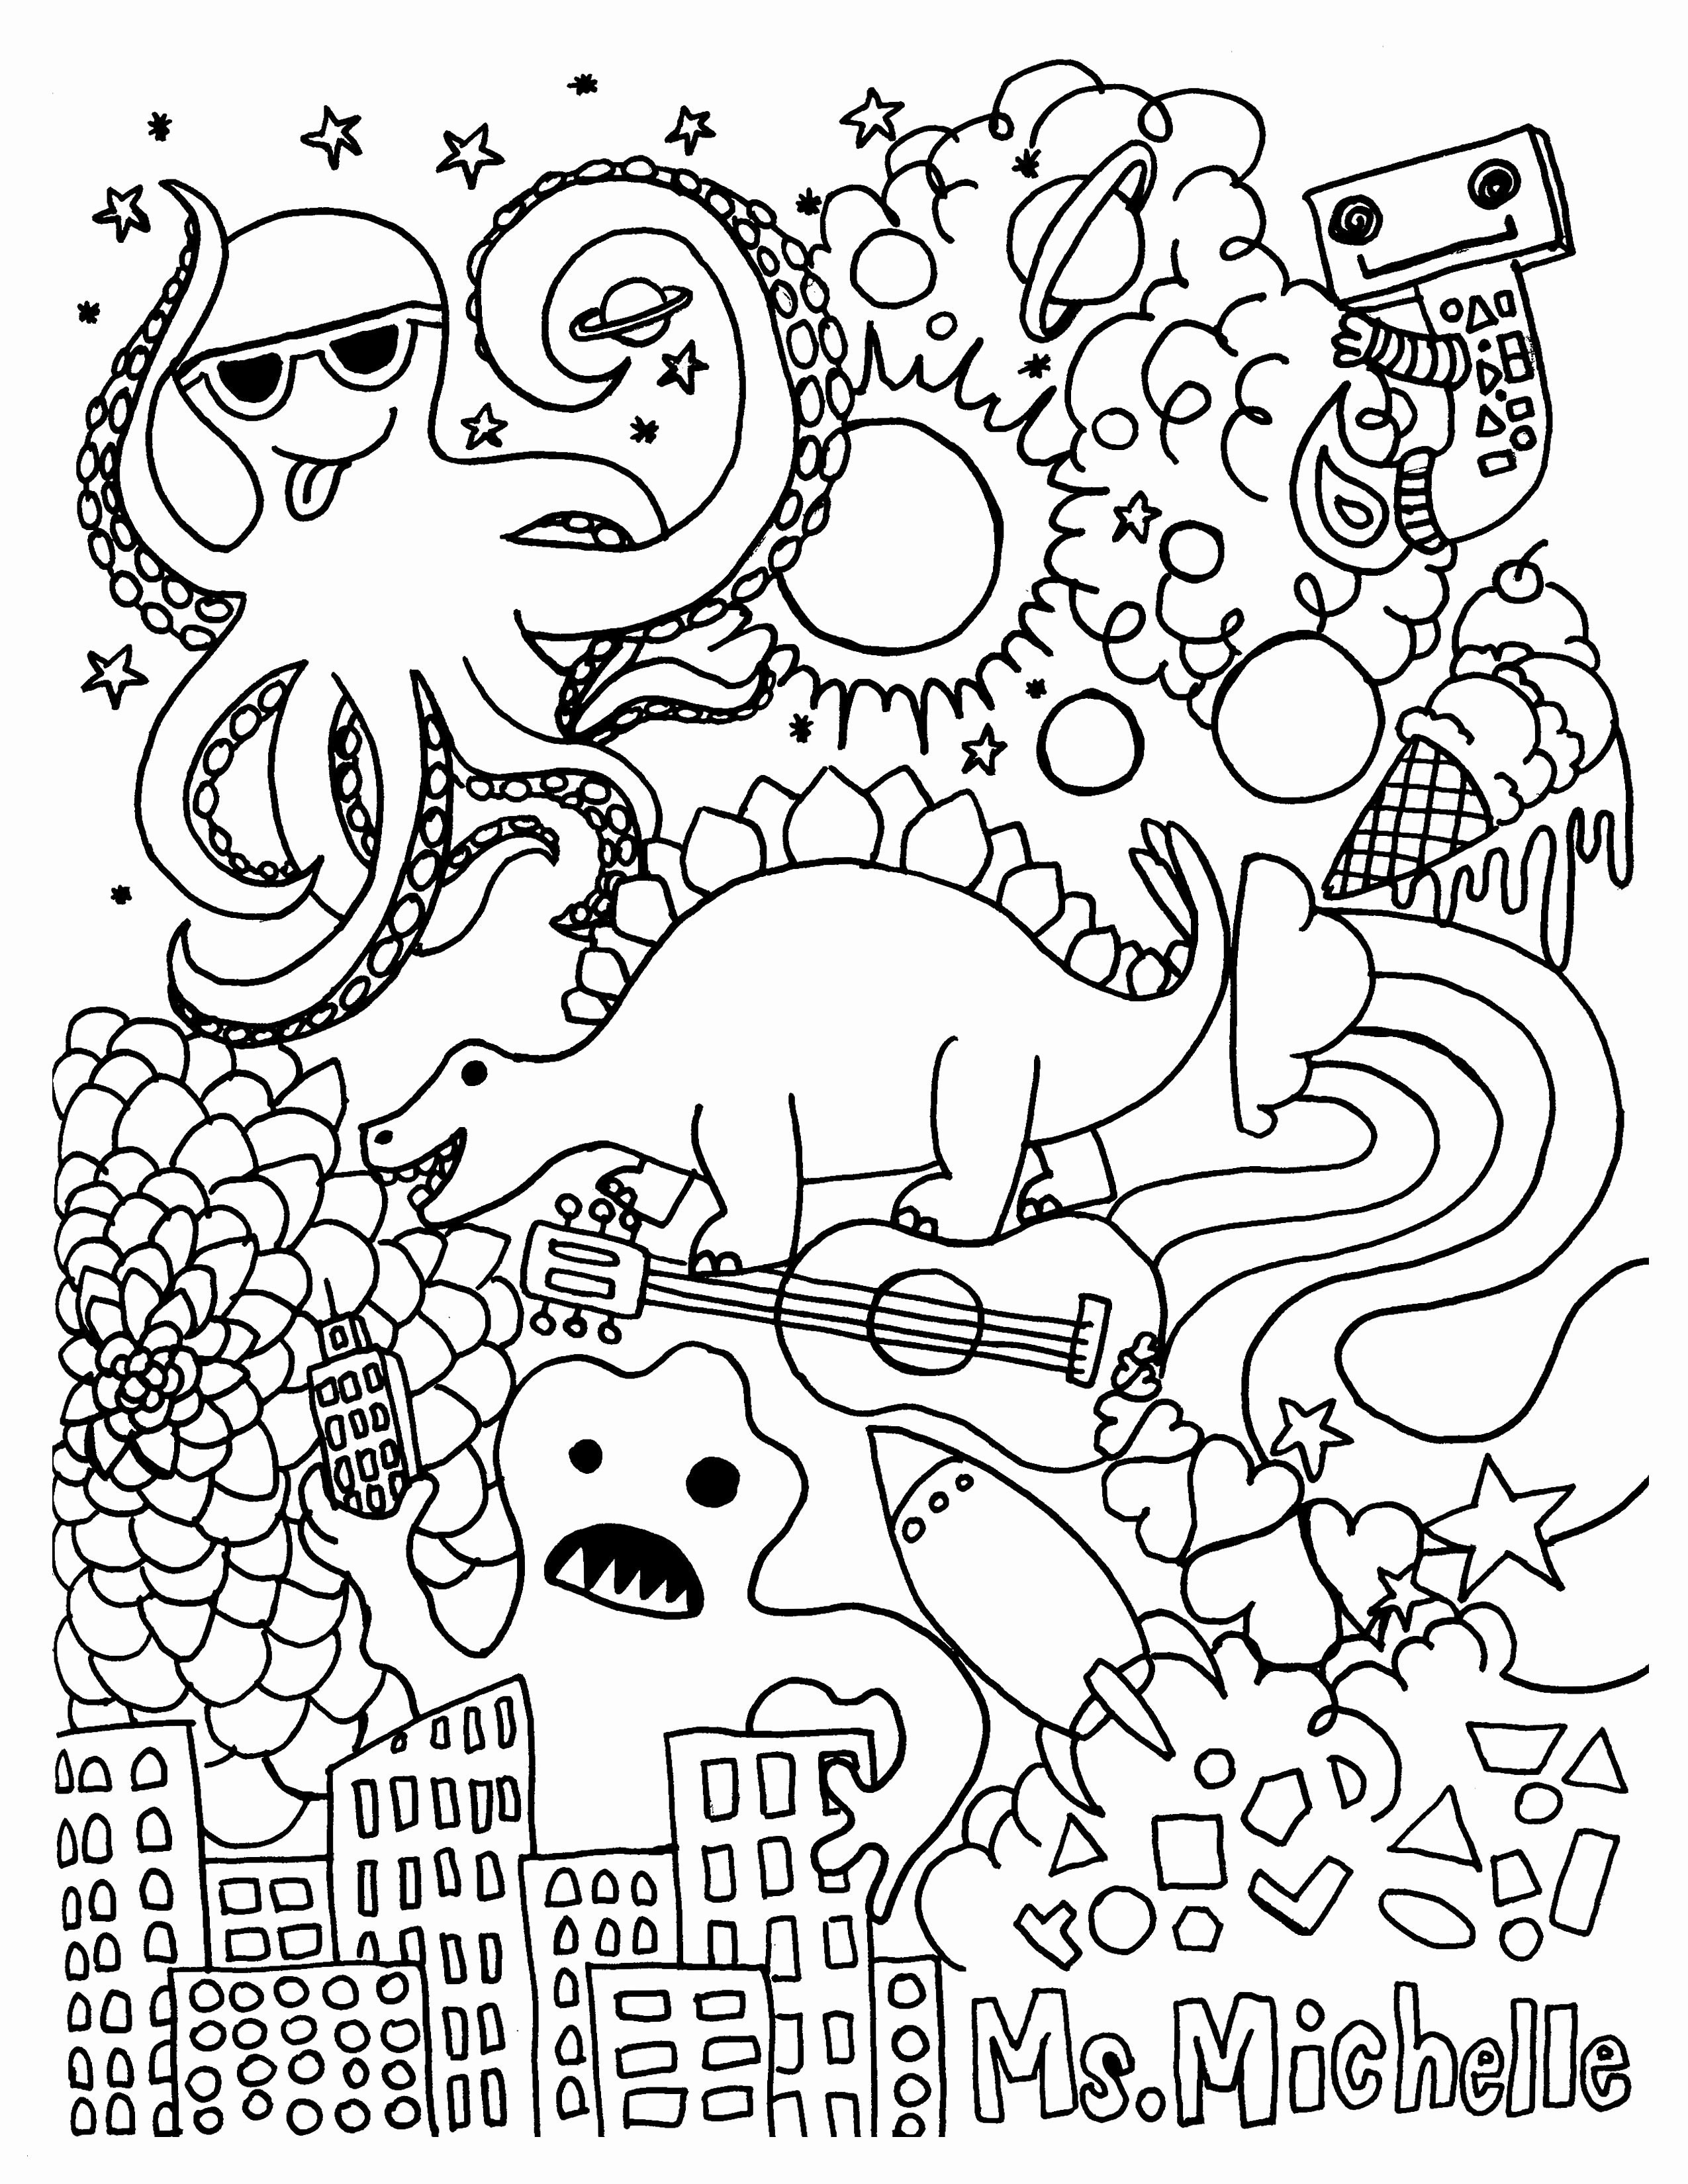 Mulan Coloring Pages Awesome Free Coloring Pages for Halloween Unique Best Coloring Page Adult Od